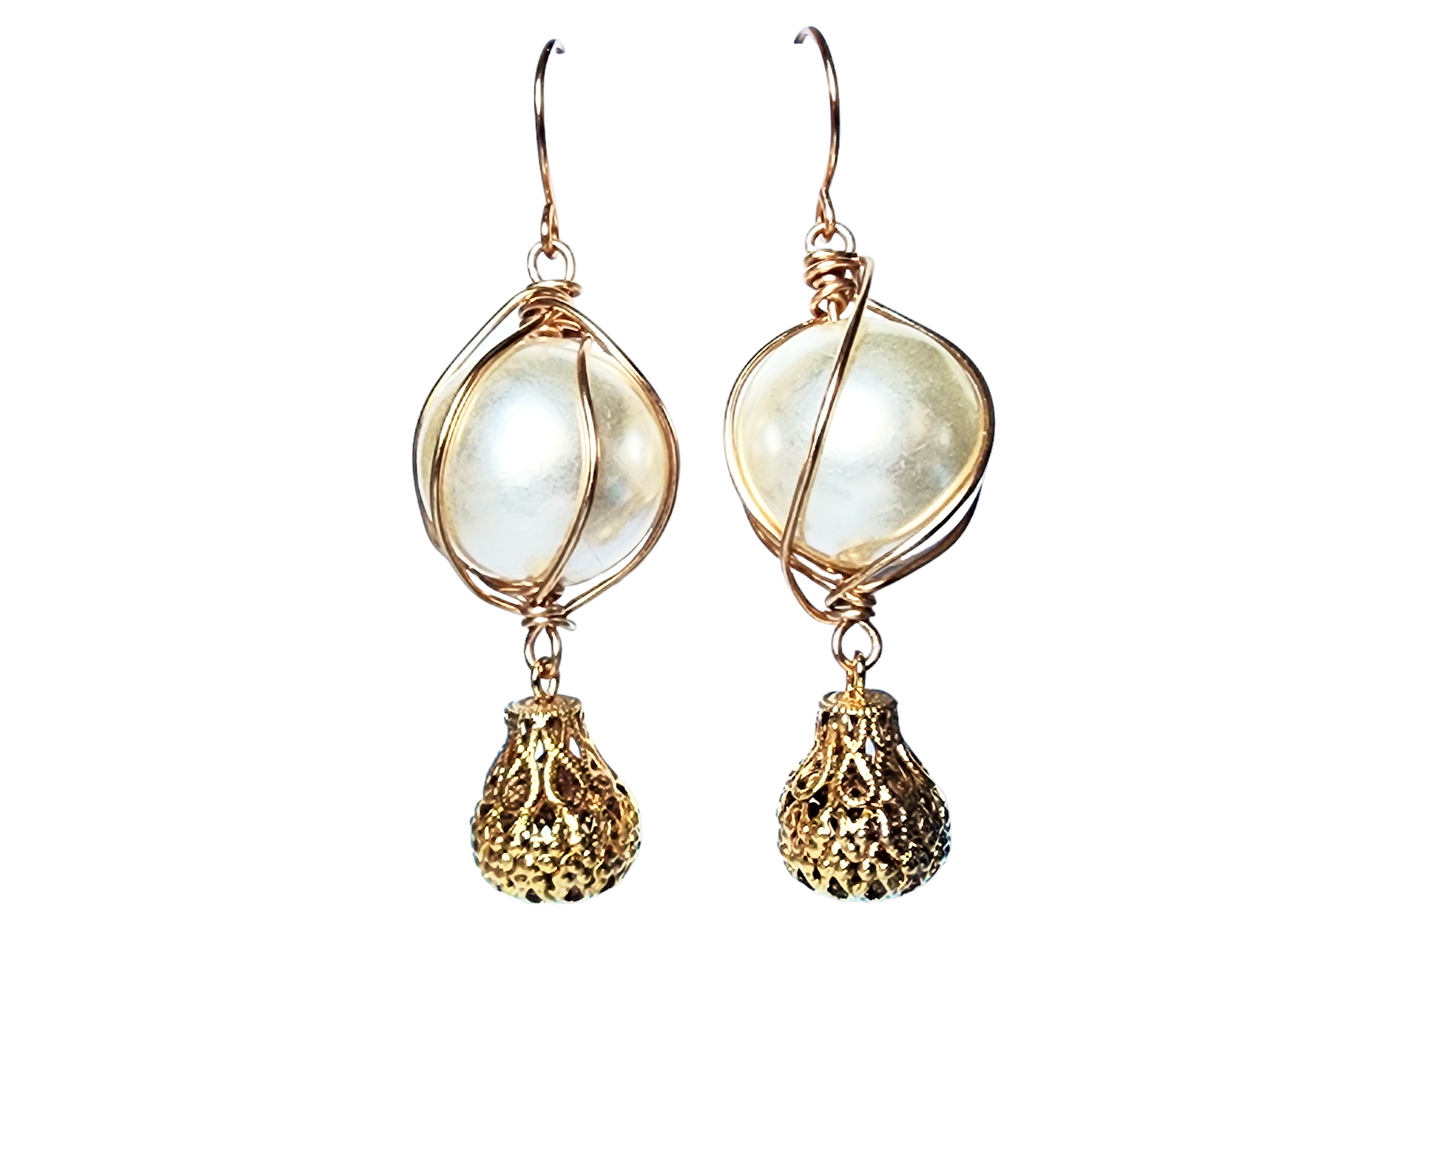 Long Elegant Large Pearl Dangle Earrings, Lage white peals, wrapped with gold wire and dangling filigree gold plated drops.